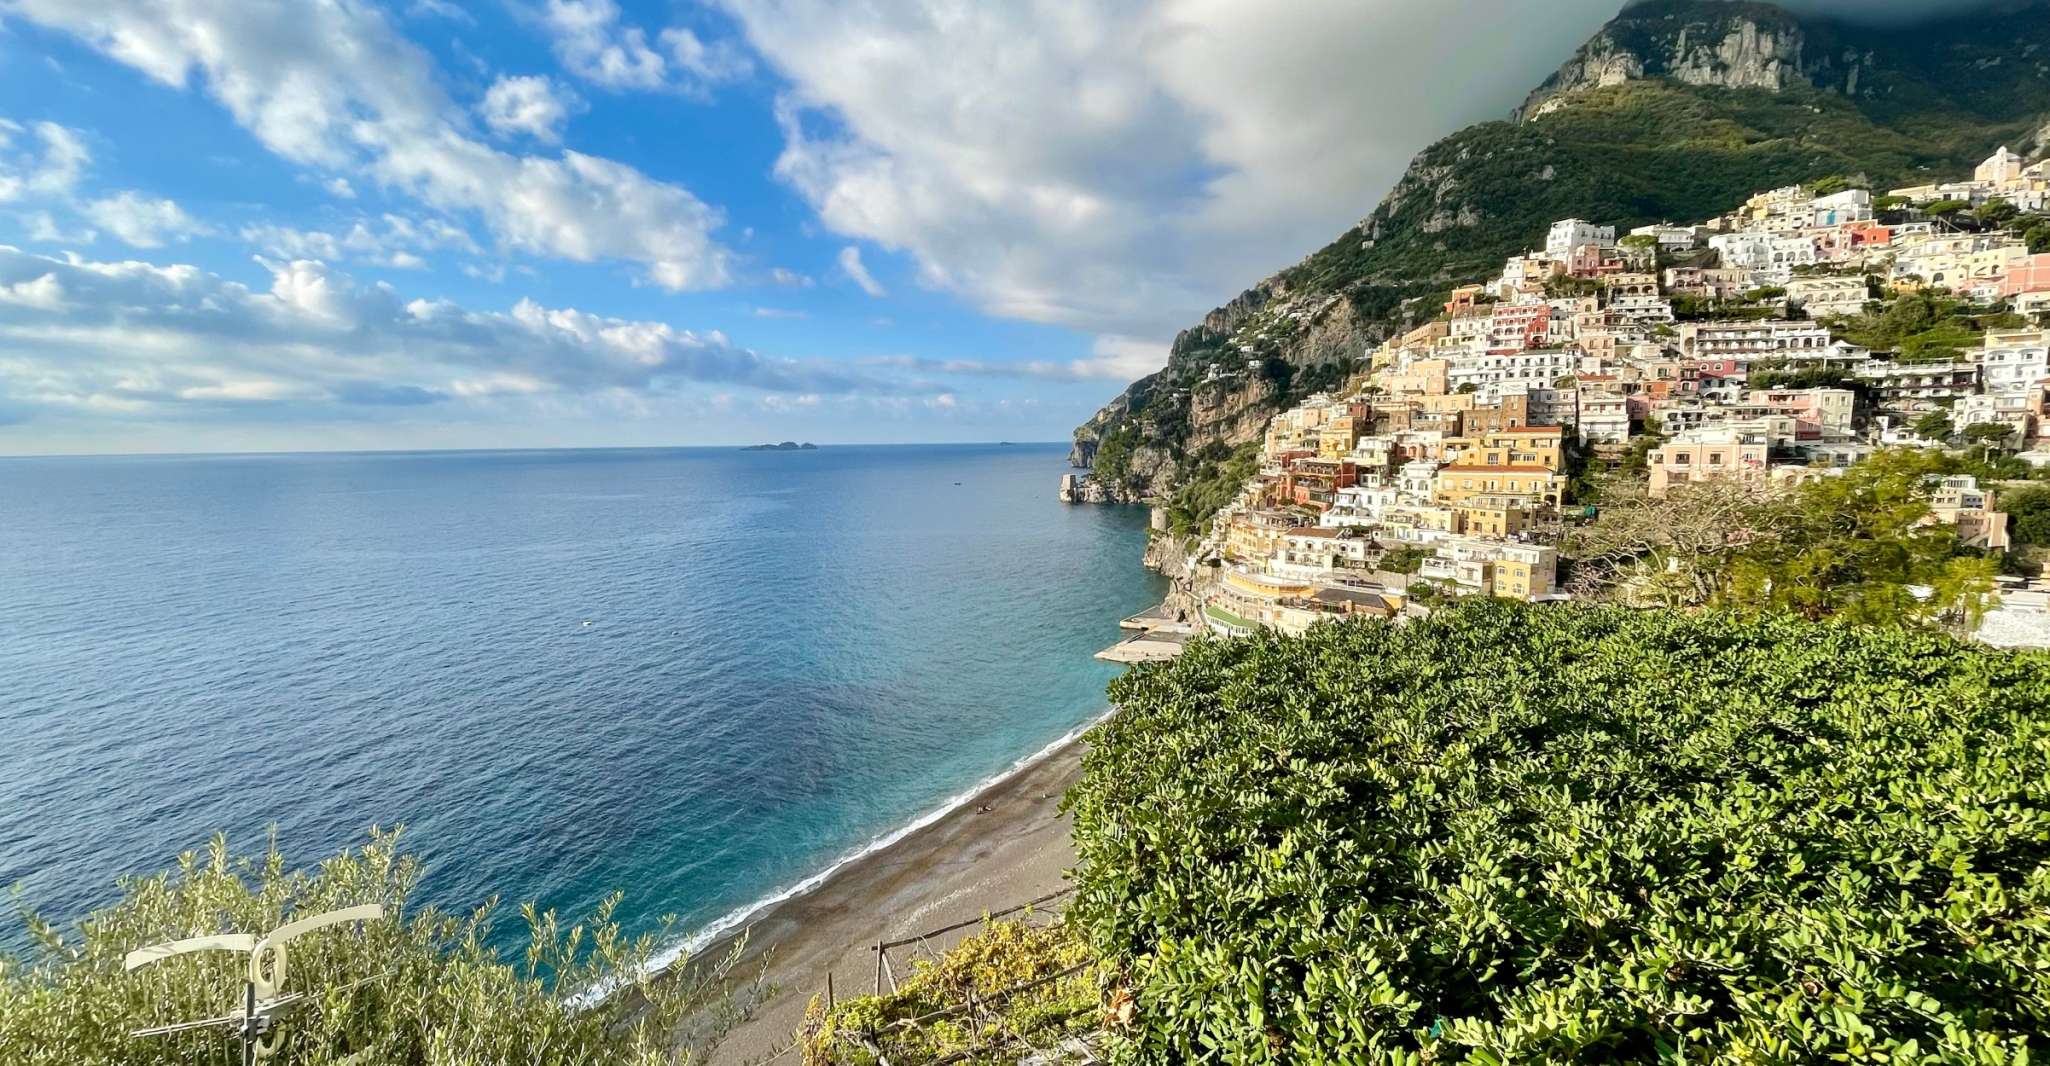 Positano, Old Town Walking Tour with Archaeologist Guide - Housity